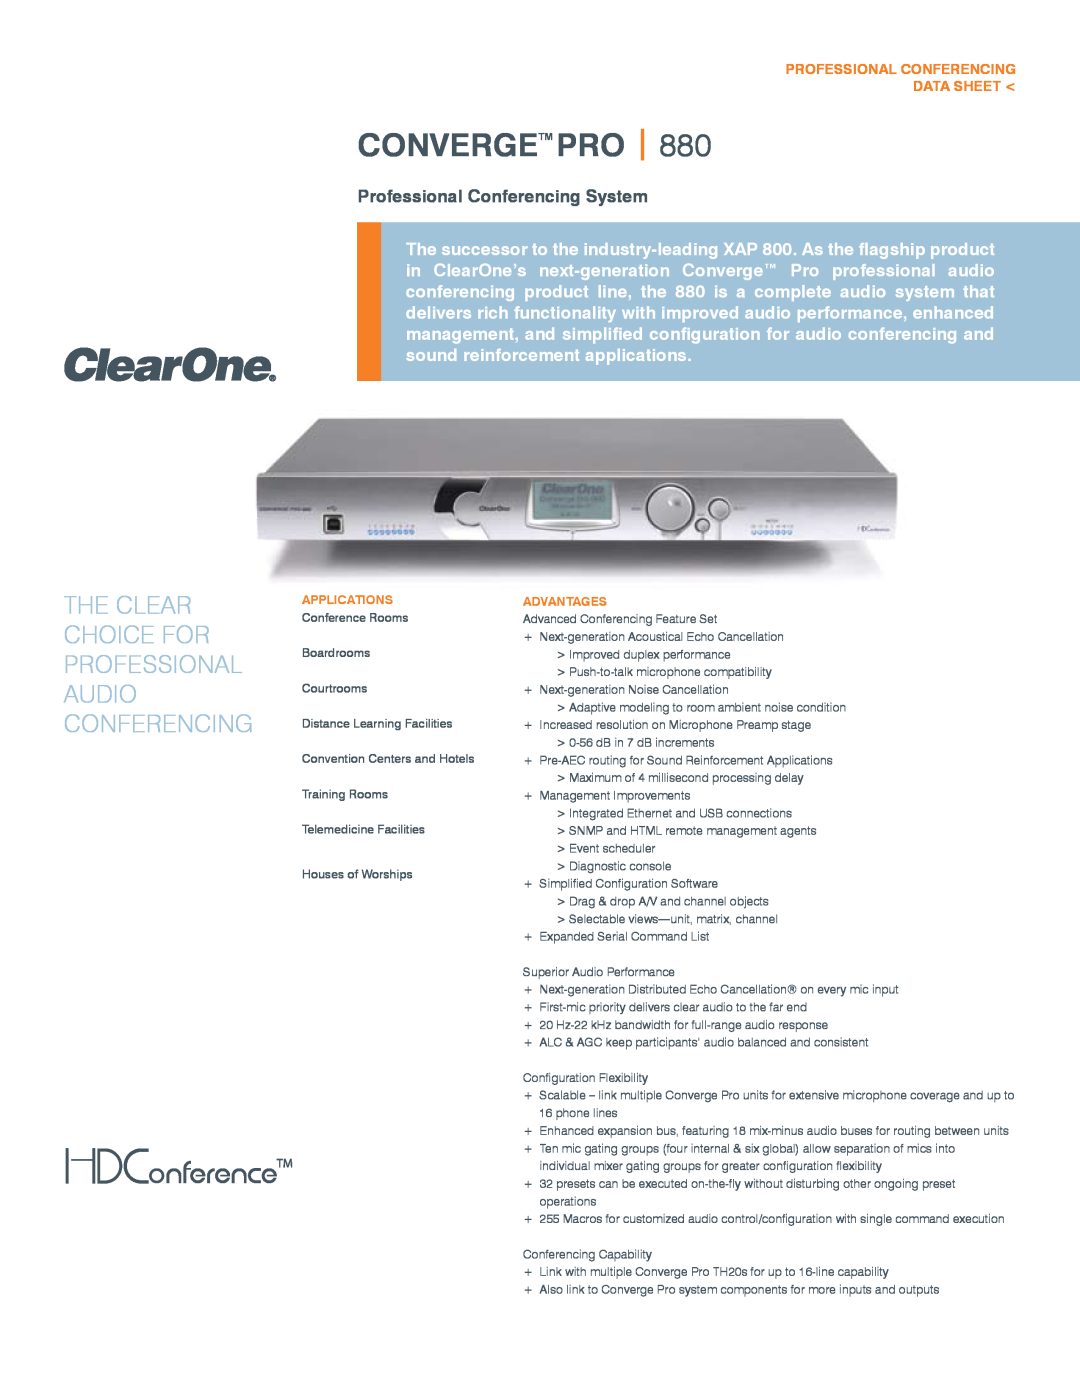 ClearOne comm 880 manual Professional Conferencing Data Sheet, Convergetm Pro, The Clear, Professional Conferencing System 